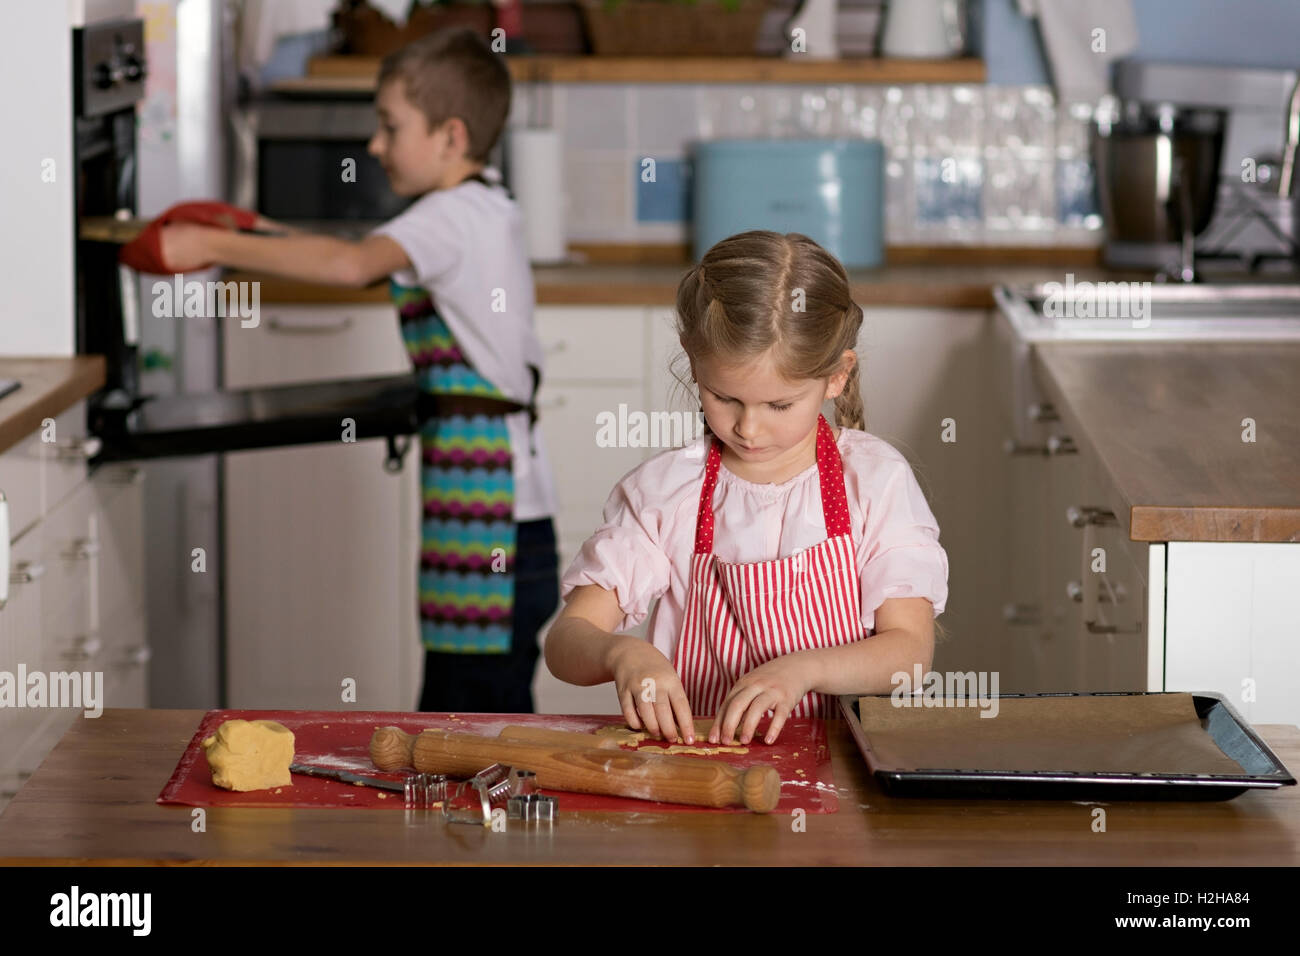 Boy taking a tray of biscuits out of a oven  while a girl is cutting shapes from in the pastry Stock Photo